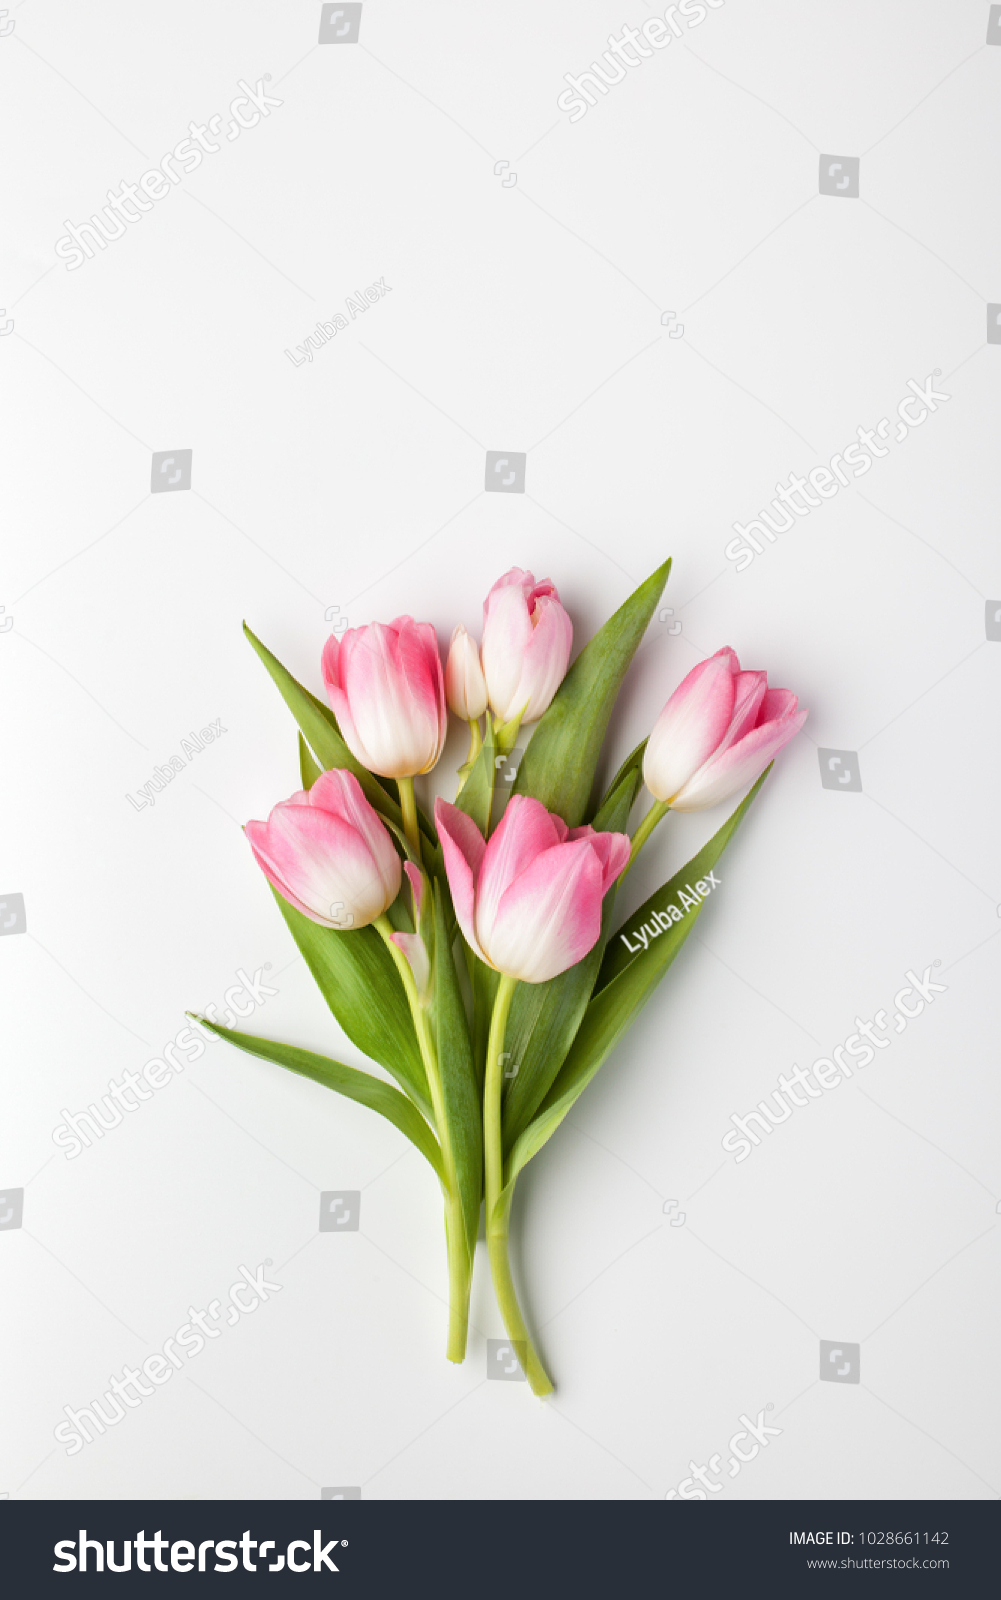 Pink tulip flowers bouquet on white background. Flat lay, top view. #1028661142